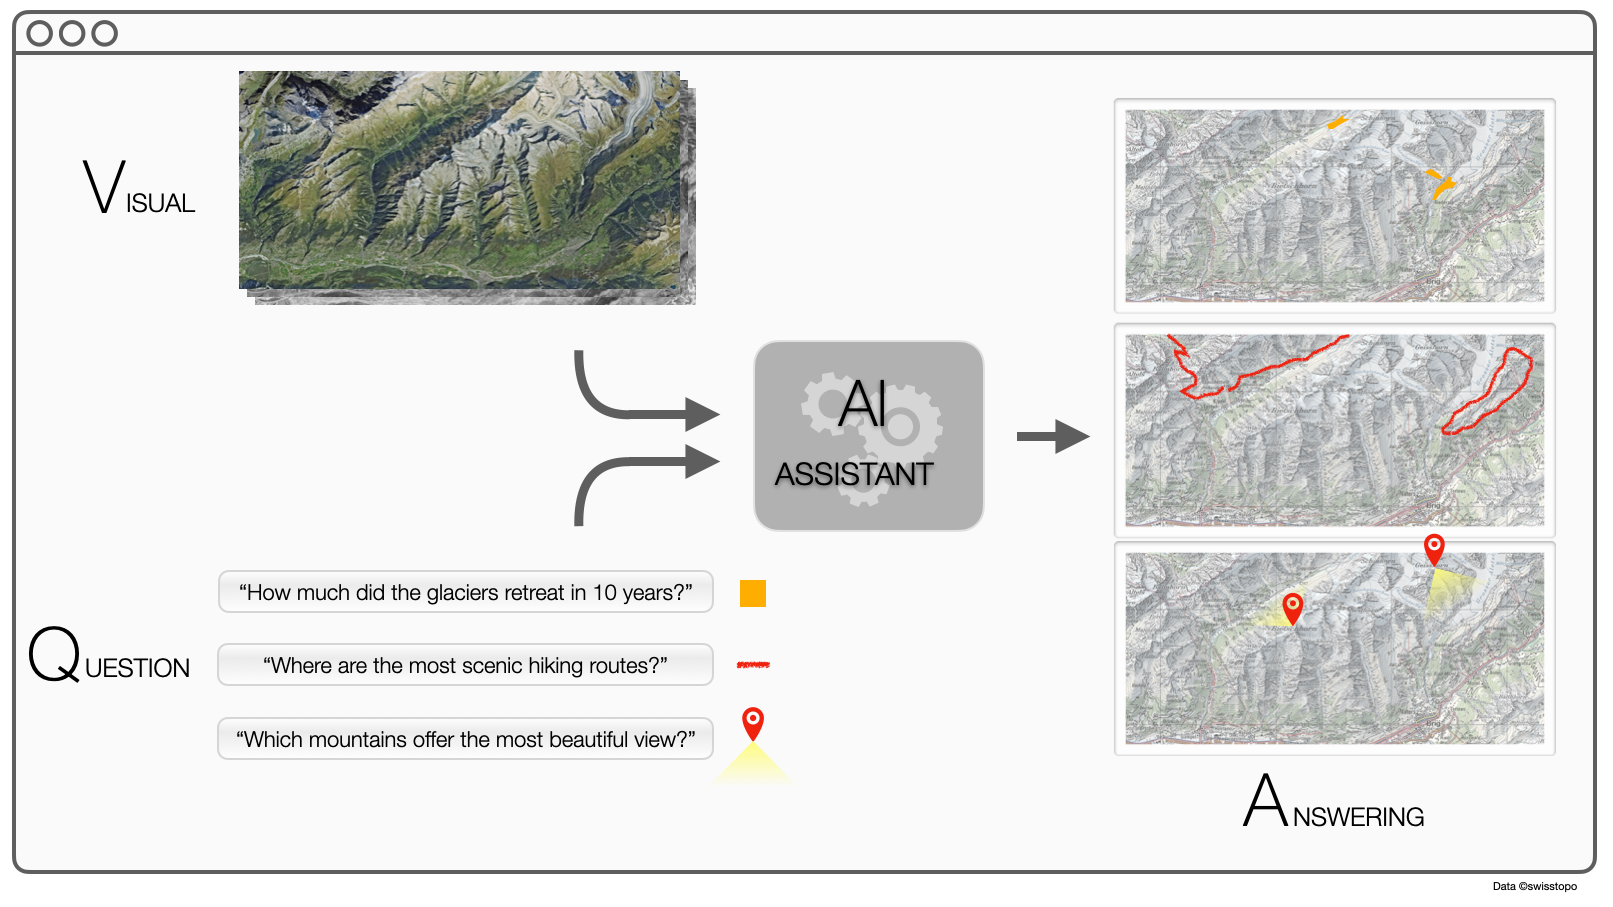 An AI assistant to interact with remote sensing images